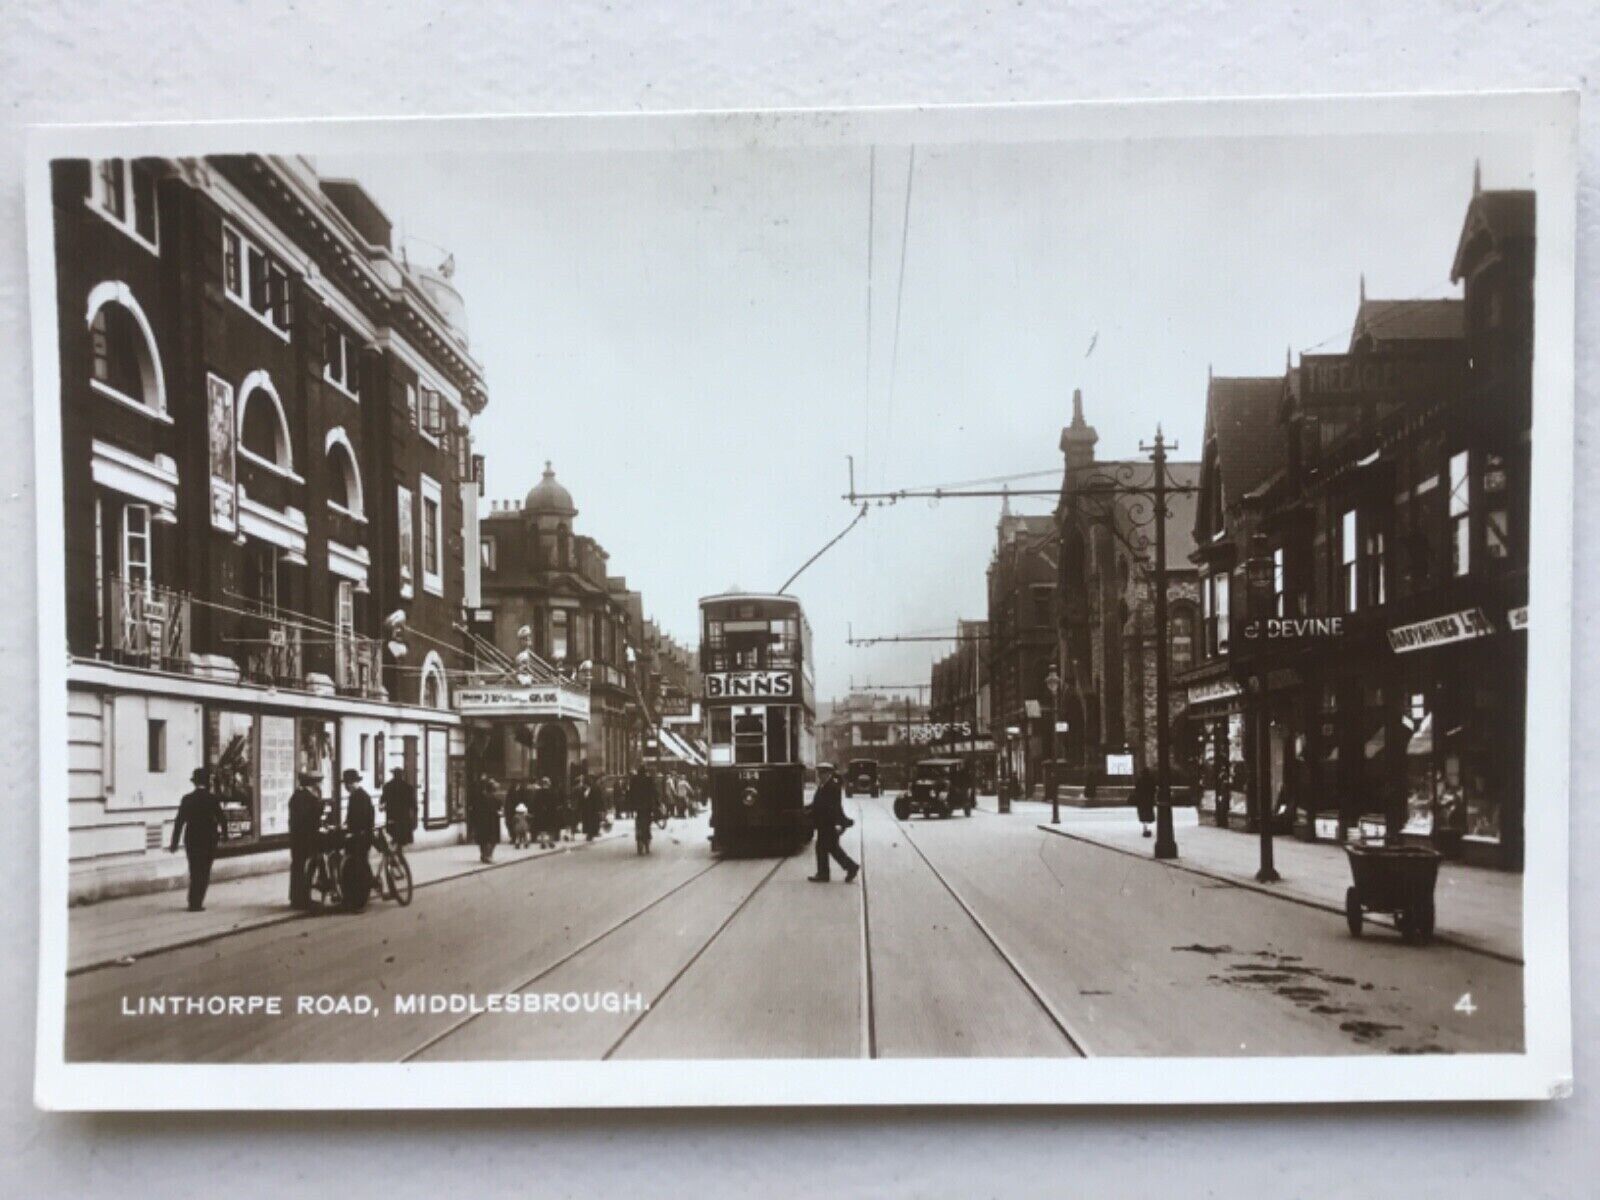 House Clearance - Middlesbrough Linthorpe Road shops, balcony tram, cars 1920s RP service